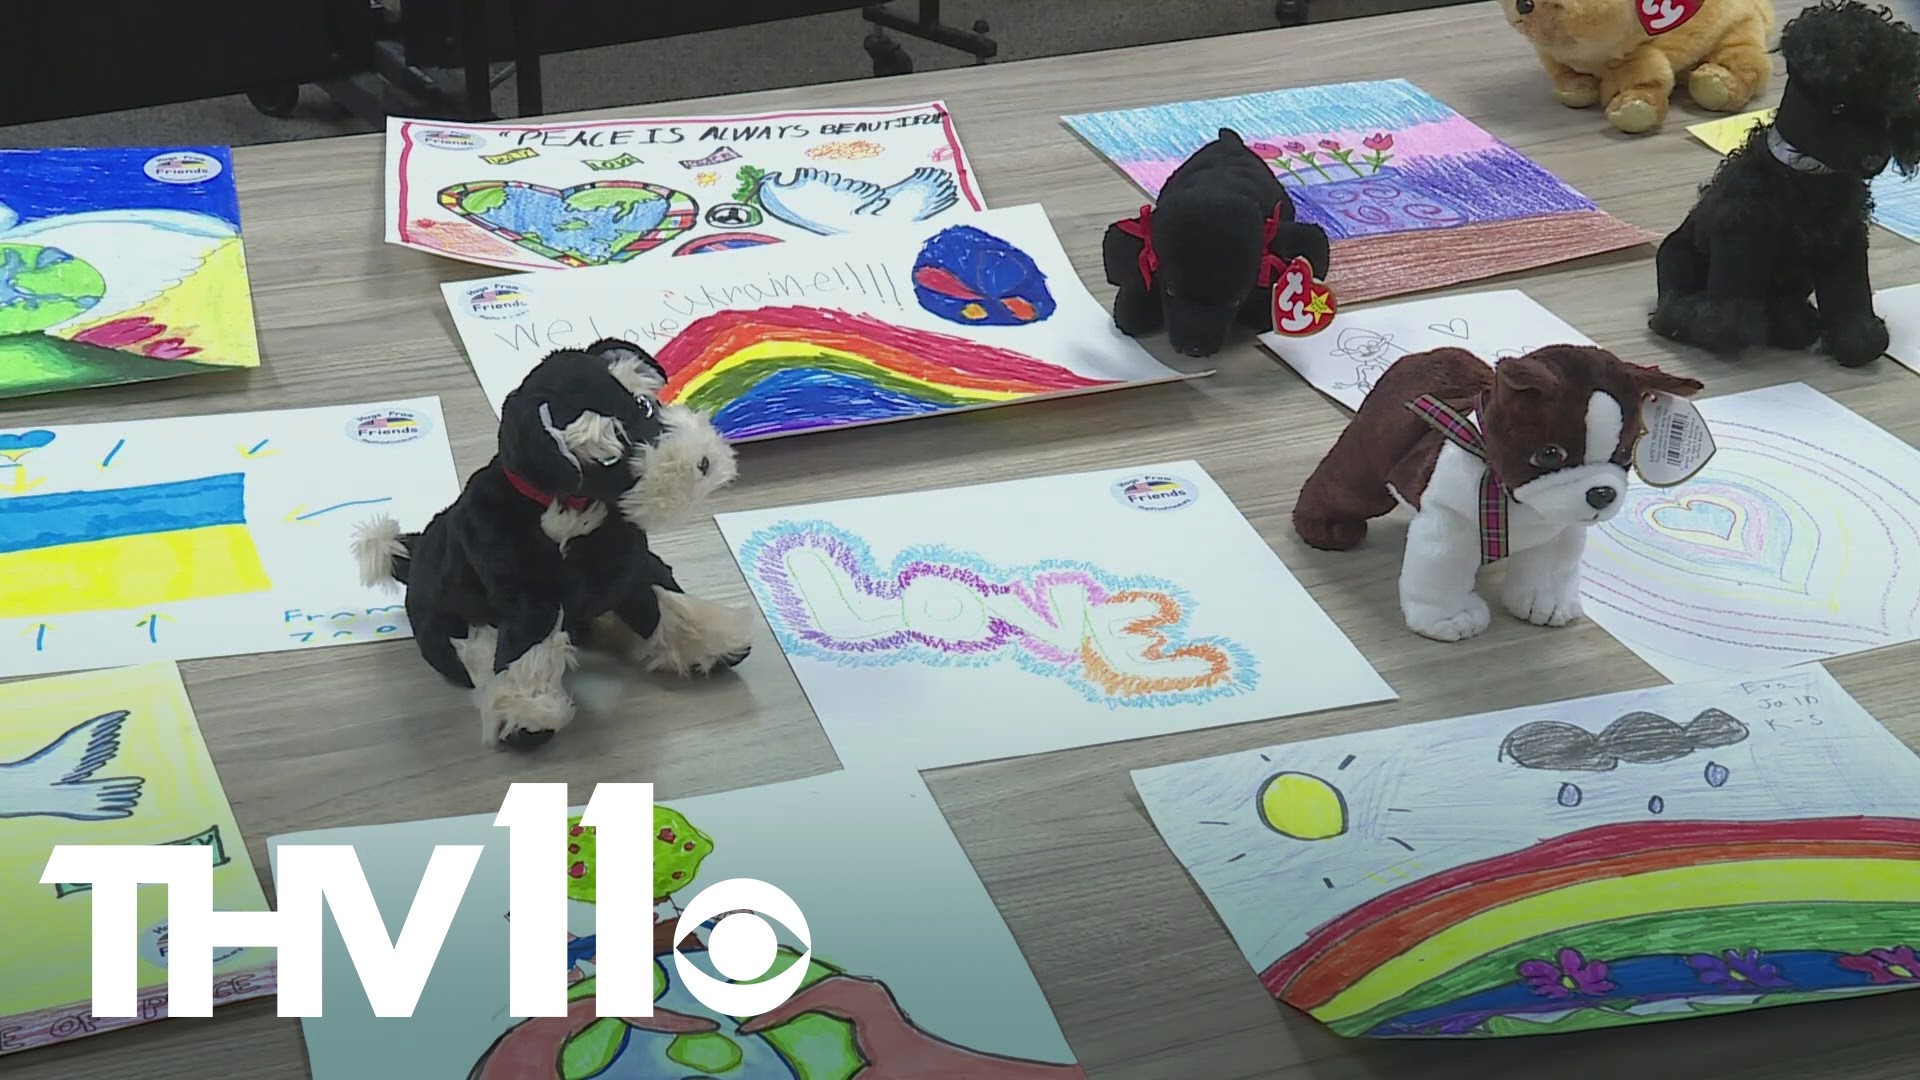 The organization is starting "Project 1000 Hugs," which "will send up to 1,000 Beanie Babies and 1,000 pieces of art to children and families in Ukraine."